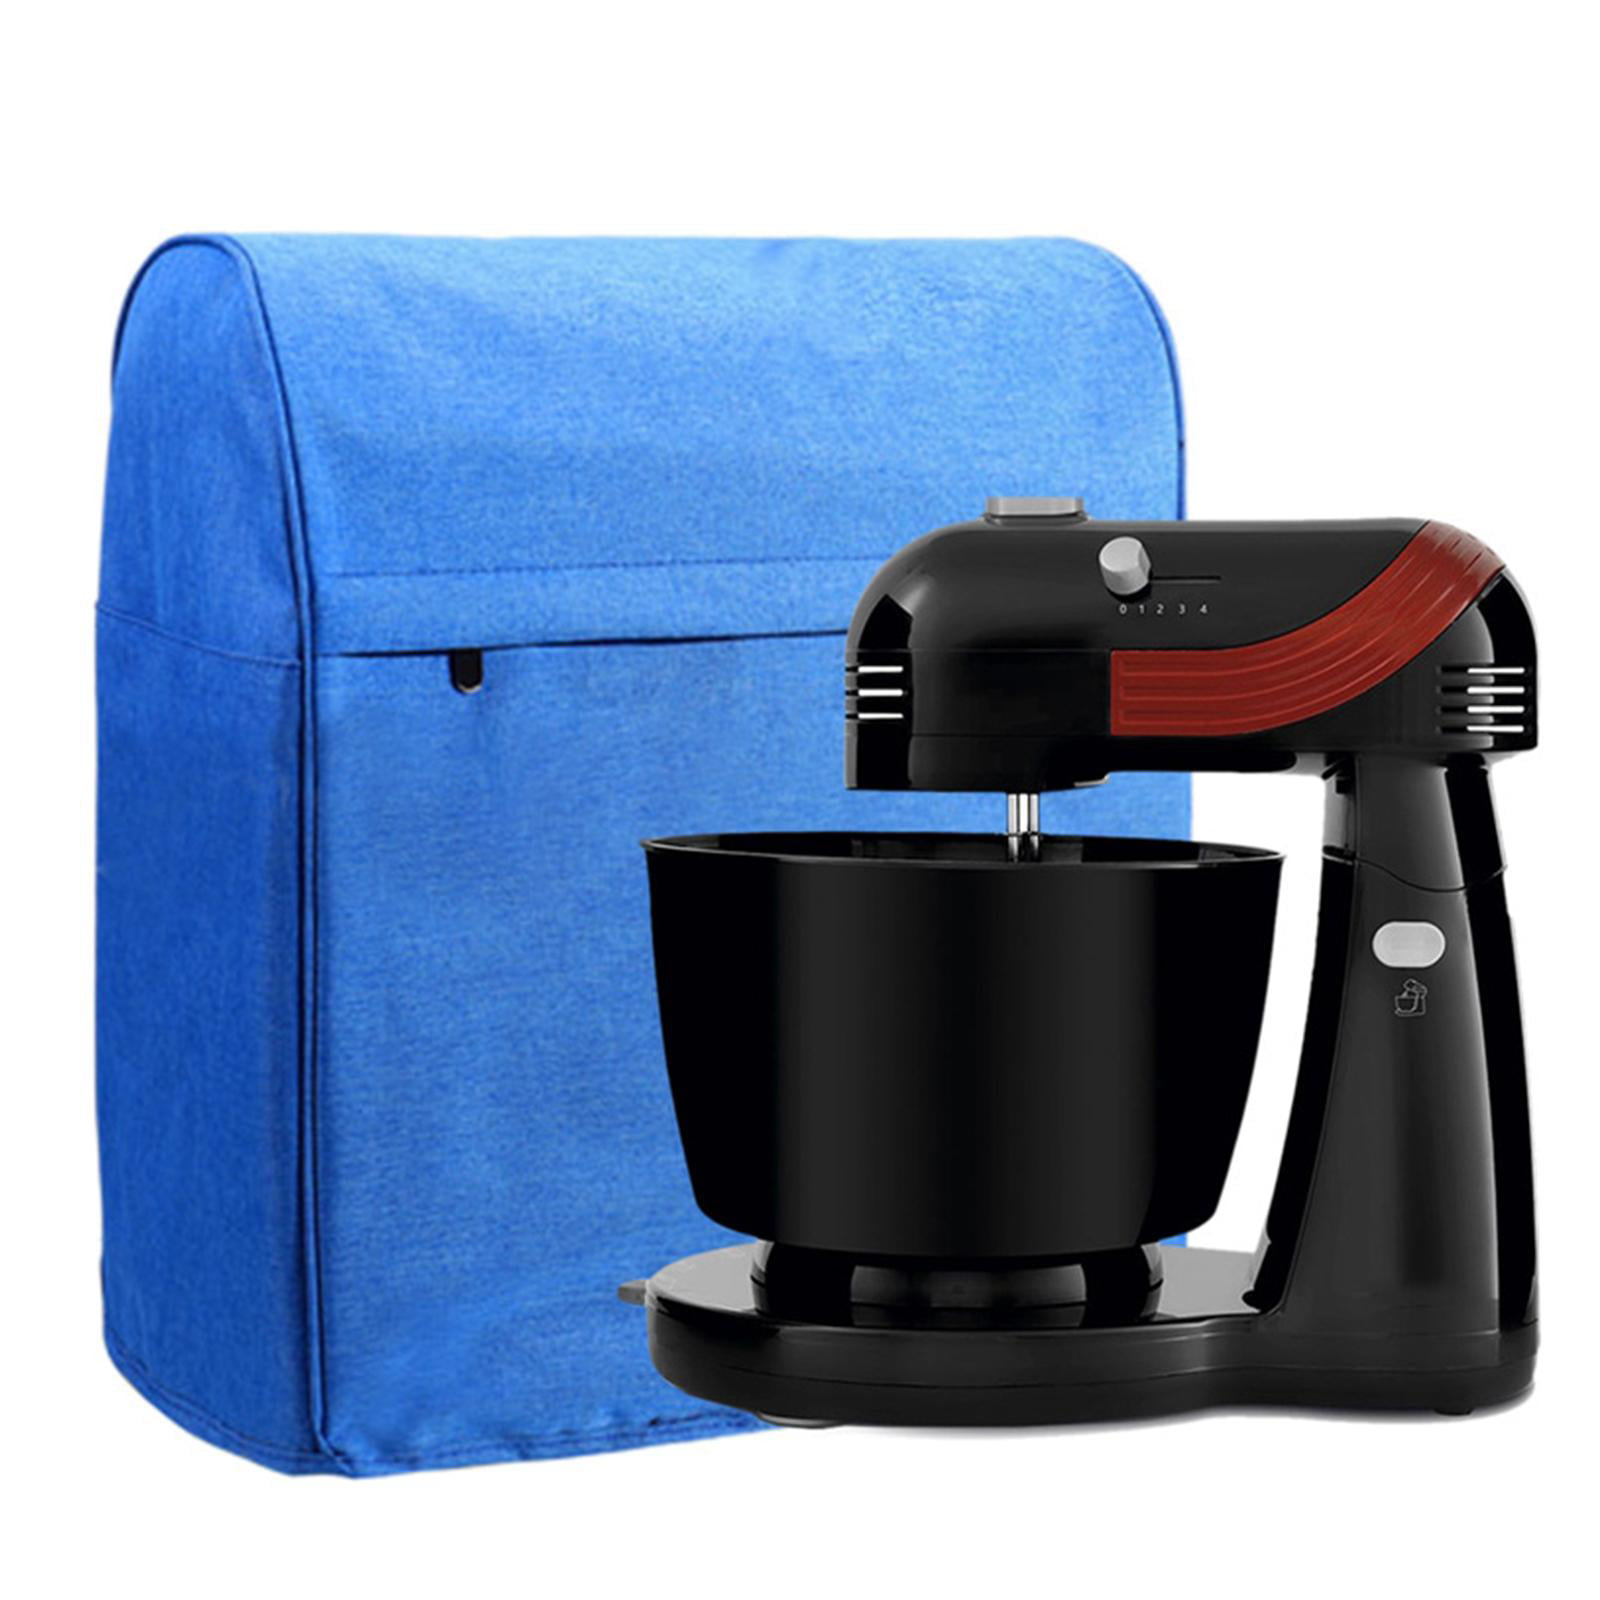 Machine Washable For Mother Light Blue/Black HUVE Blender Cover Polyester/Cotton Quilted Kitchen Stand Mixer Dust Cover Dust And Fingerprint Protection 